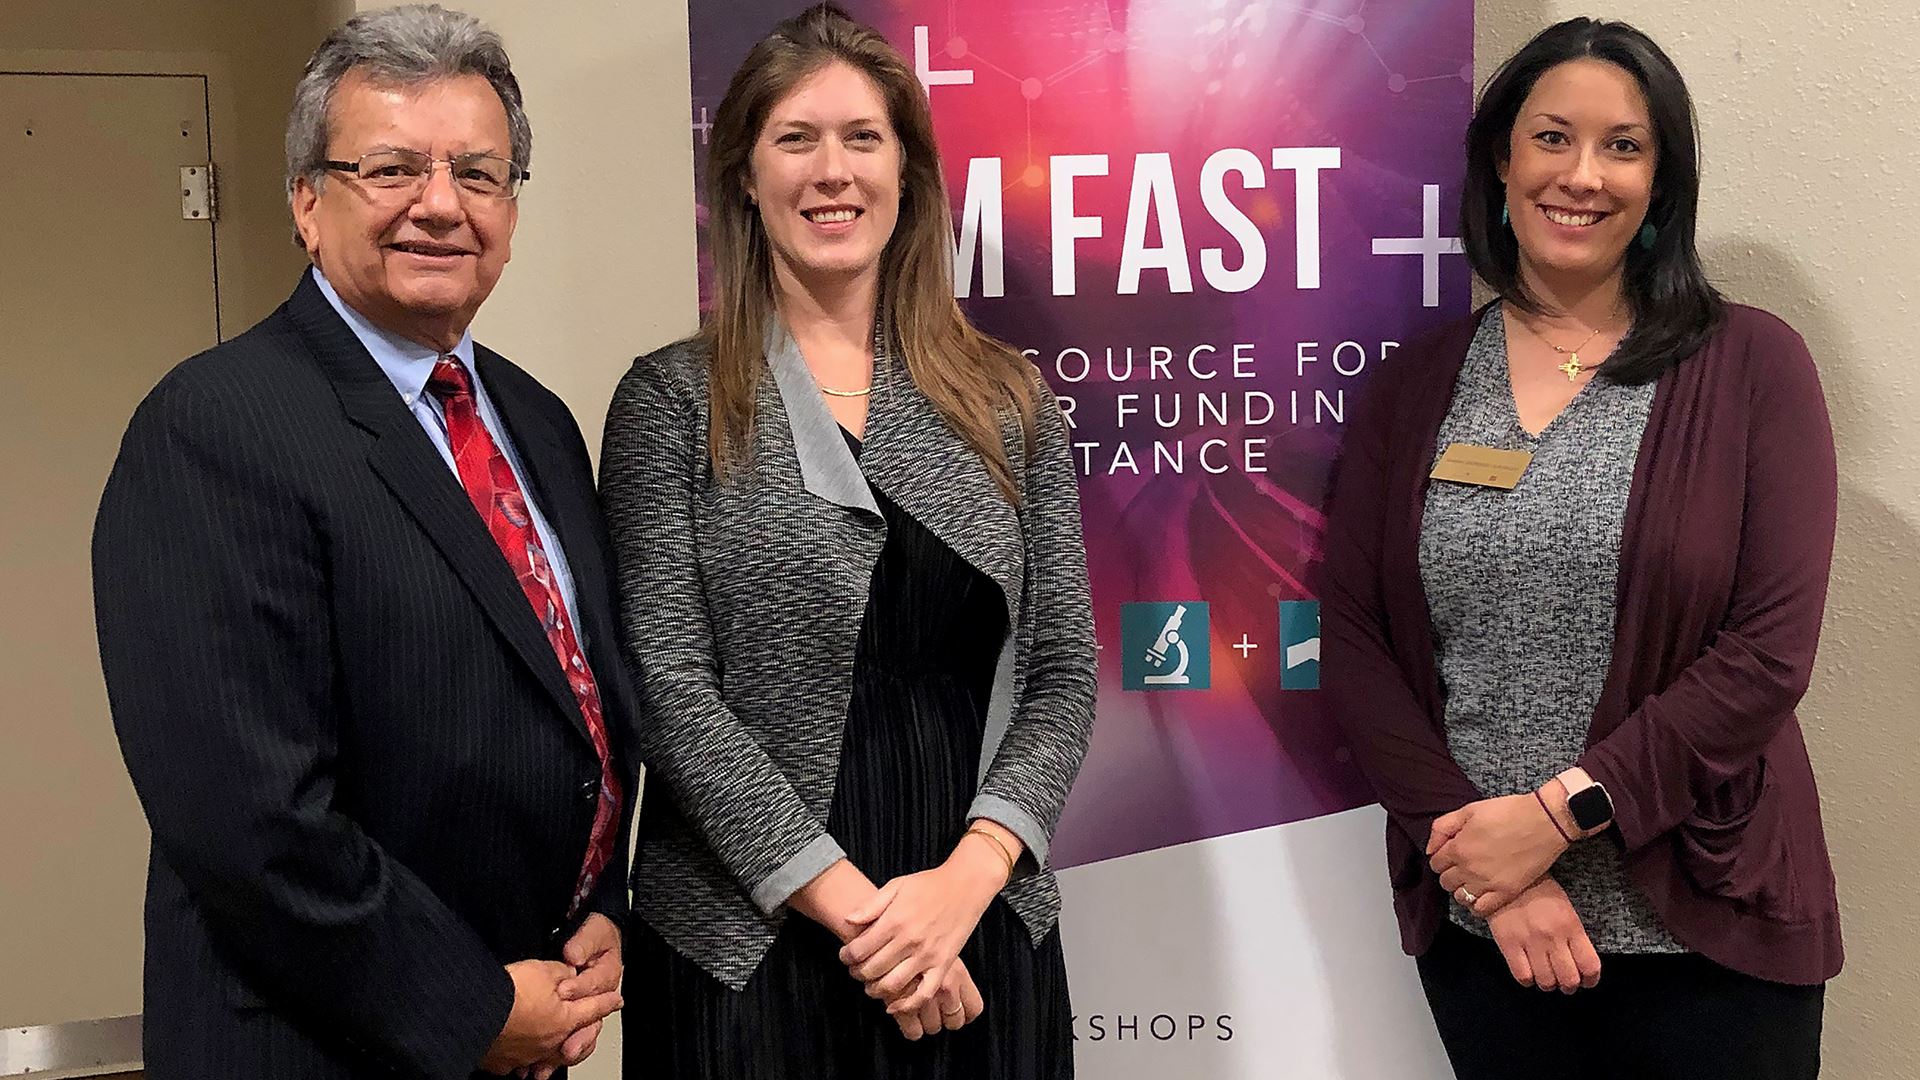 NMSU-based NM FAST program recognized with 2020 Tibbetts Award